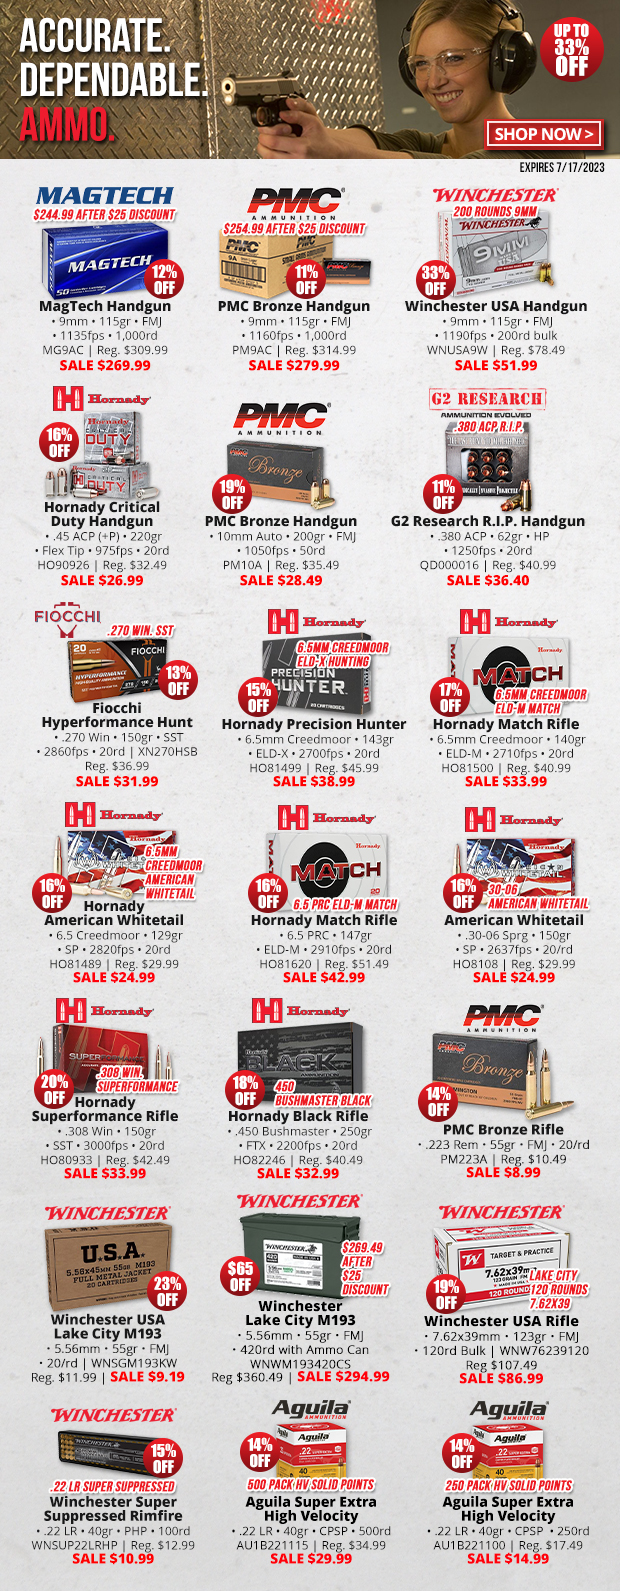 Shop Our Ammo Sale  Save Up to 33% Off